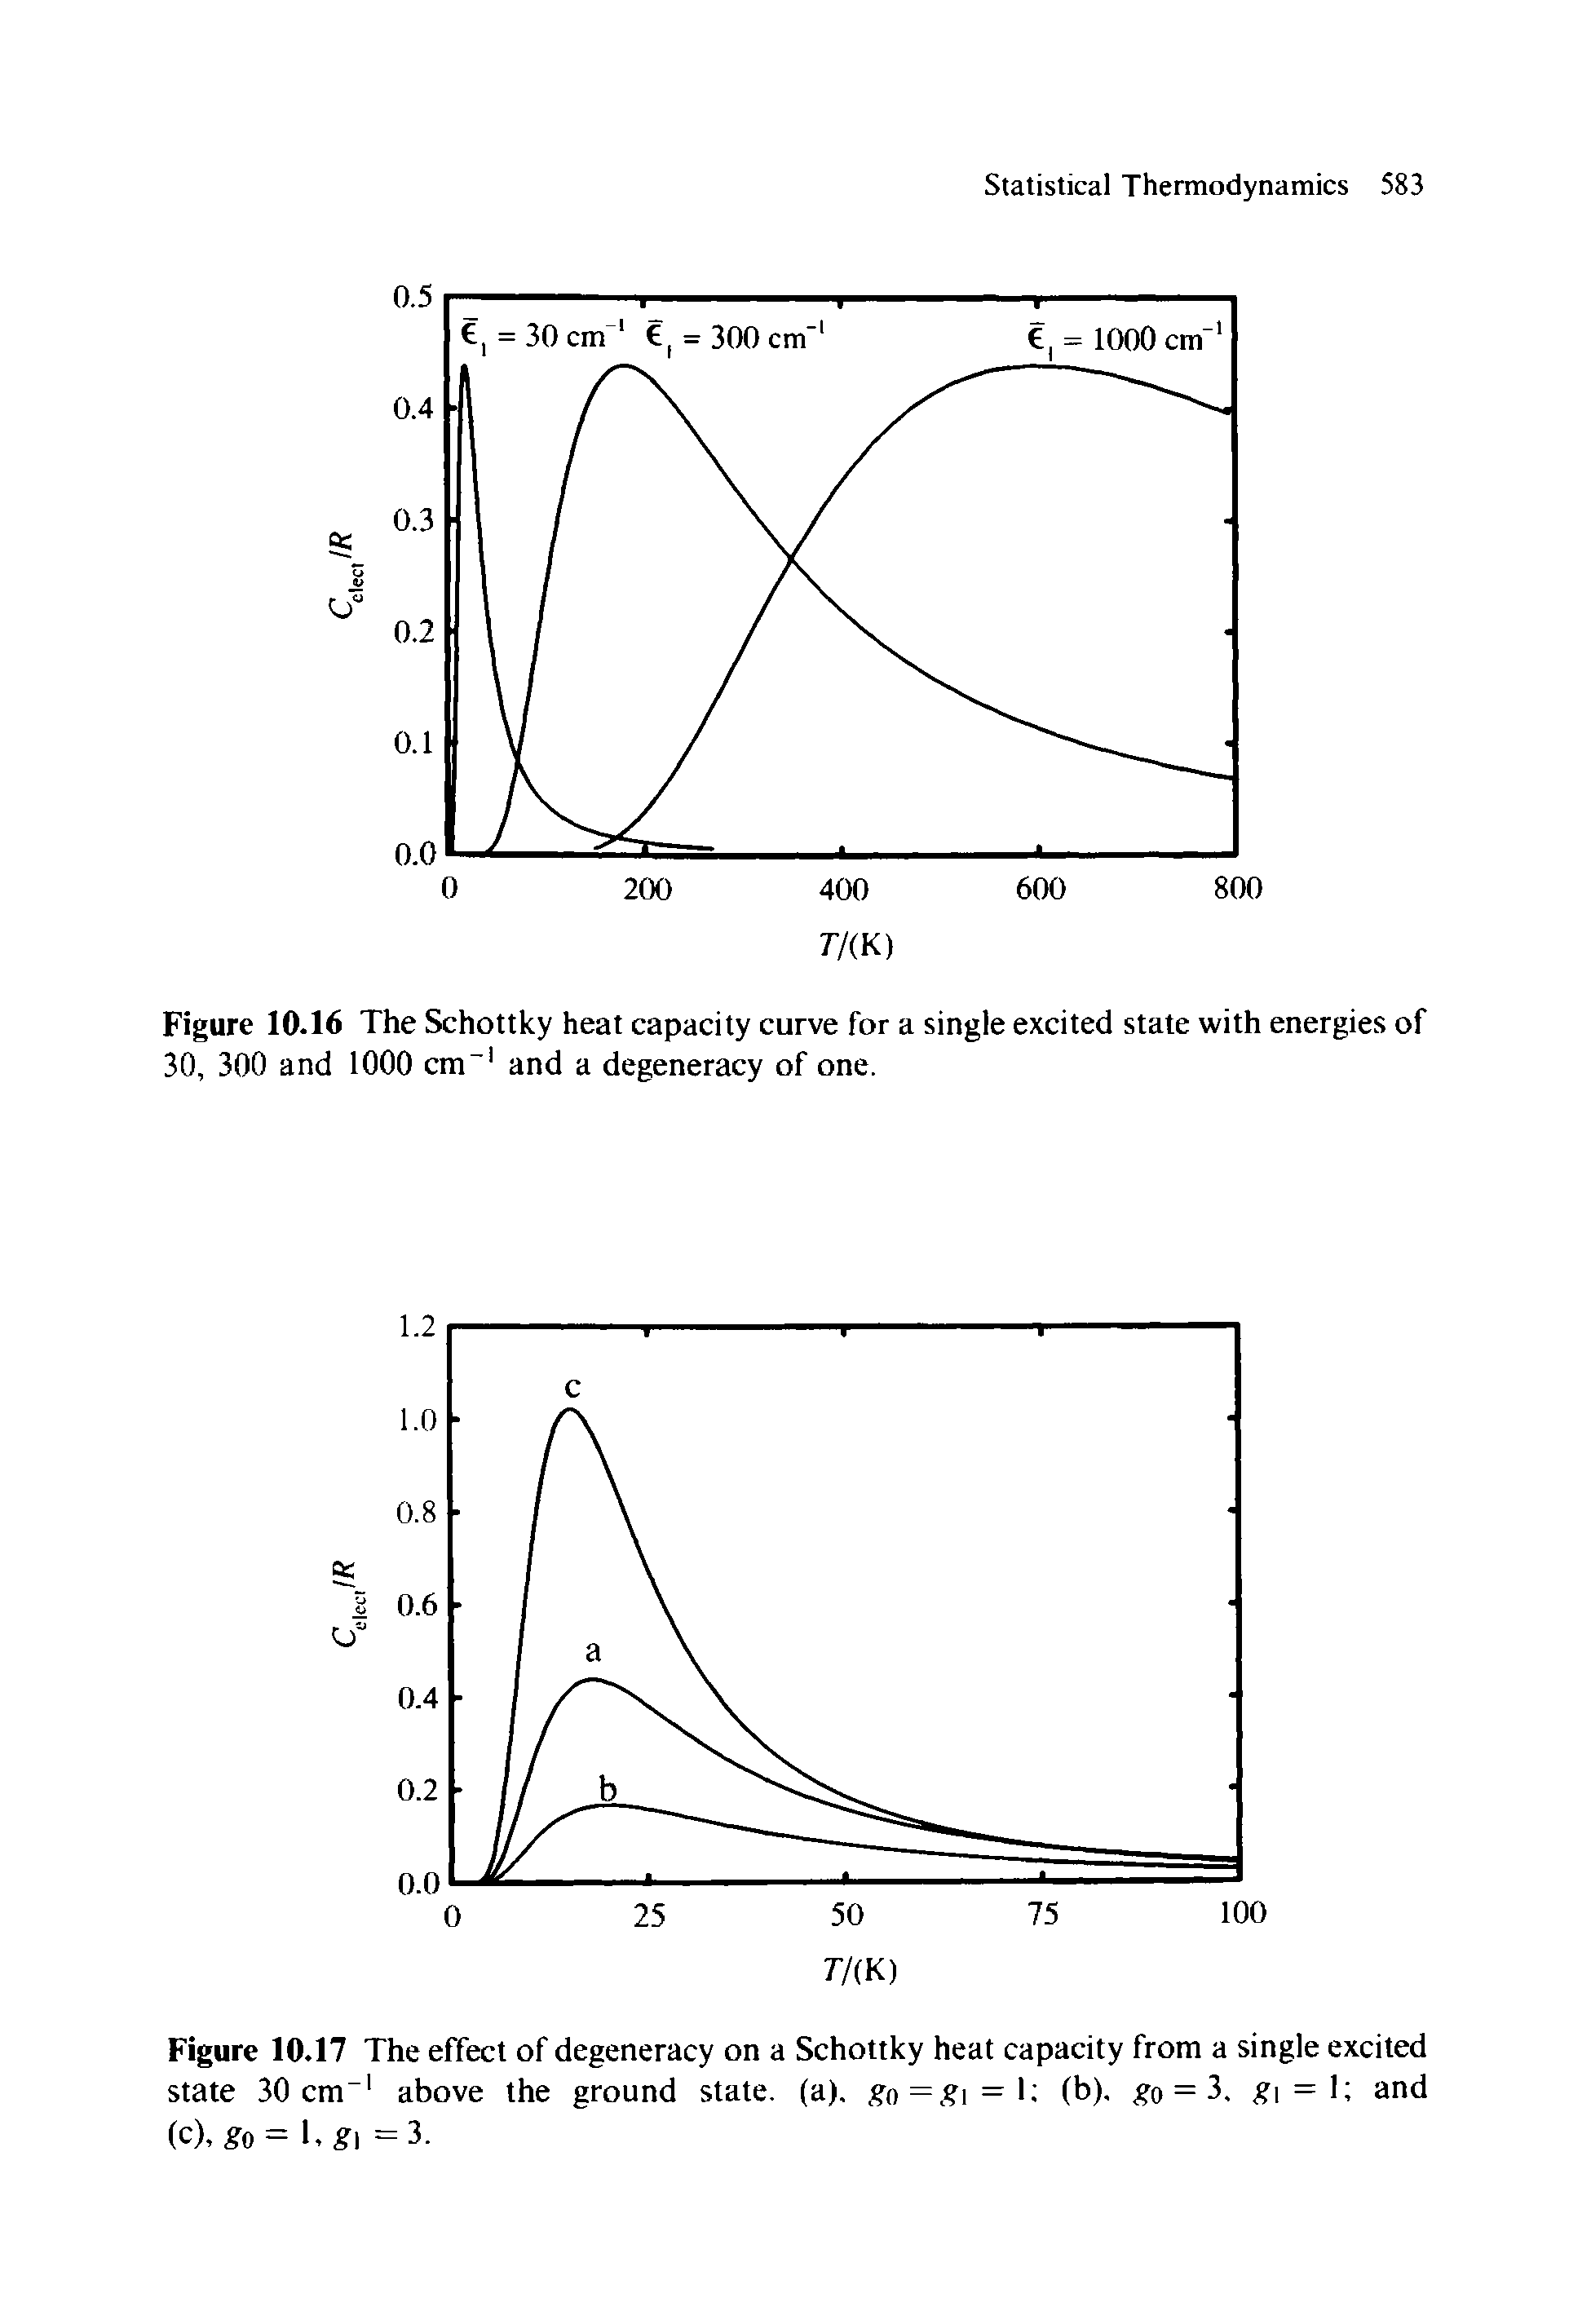 Figure 10-16 The Schottky heat capacity curve for a single excited state with energies of 30, 300 and 1000 cm-1 and a degeneracy of one.